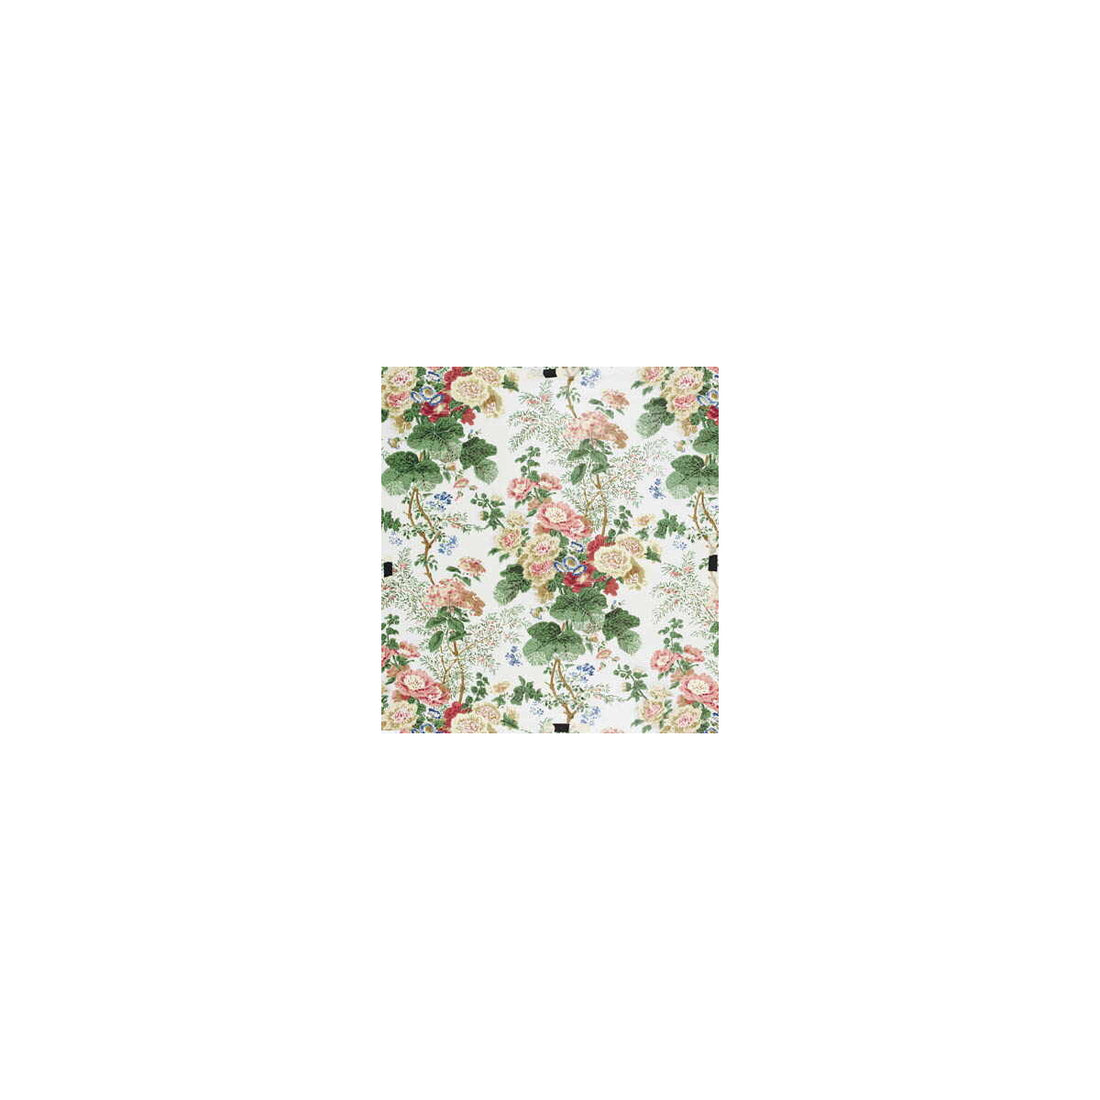 Hollyhock Hdb fabric in white/coral color - pattern HOLLYHOCK HAND.WHITEC.0 - by Lee Jofa